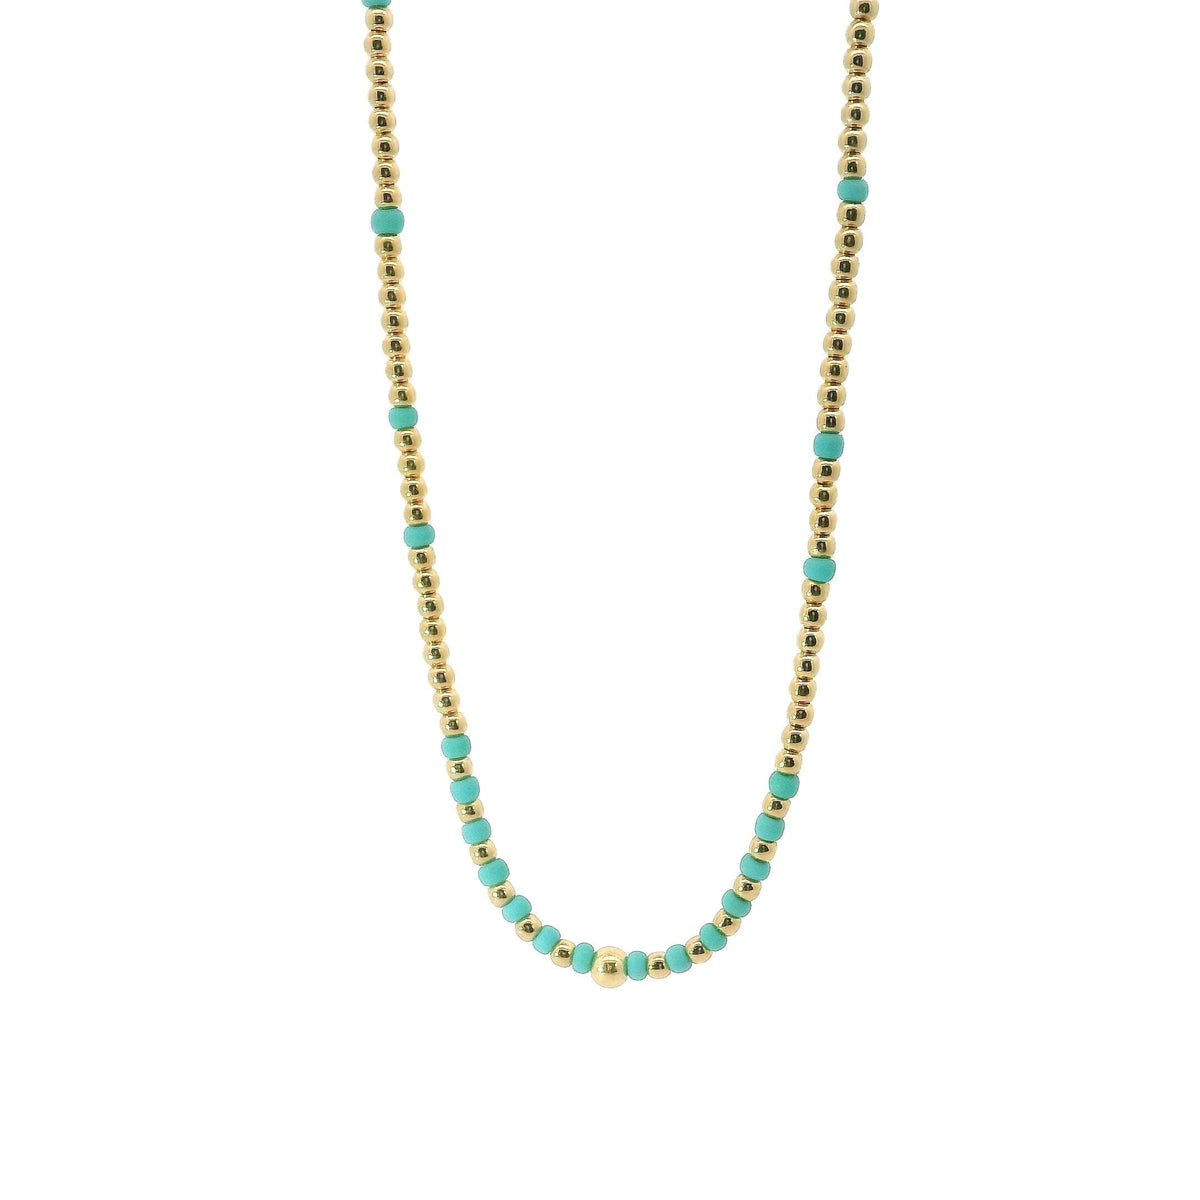 Turquoise Mix Bead Necklace